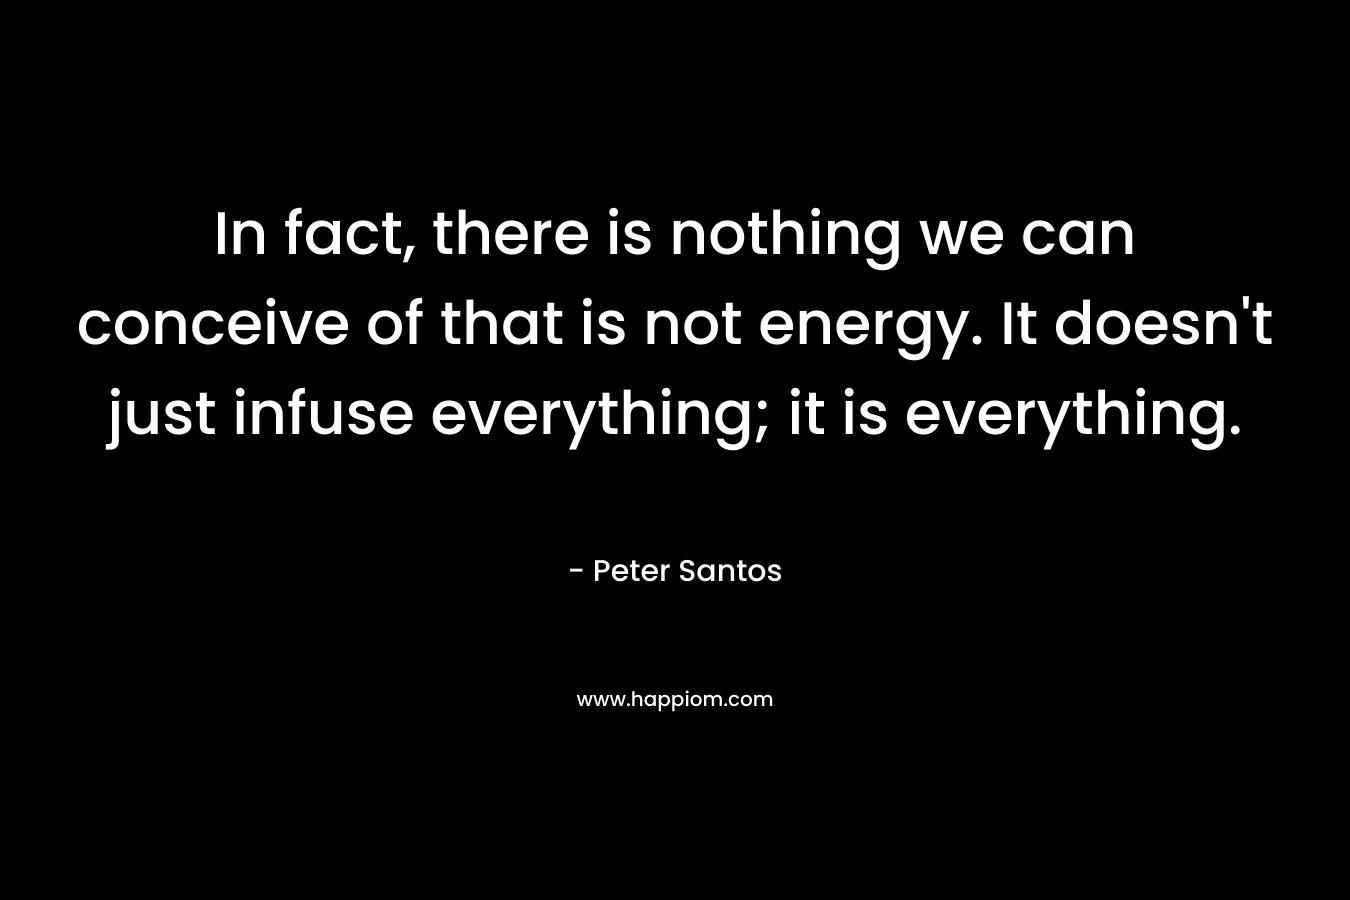 In fact, there is nothing we can conceive of that is not energy. It doesn't just infuse everything; it is everything.